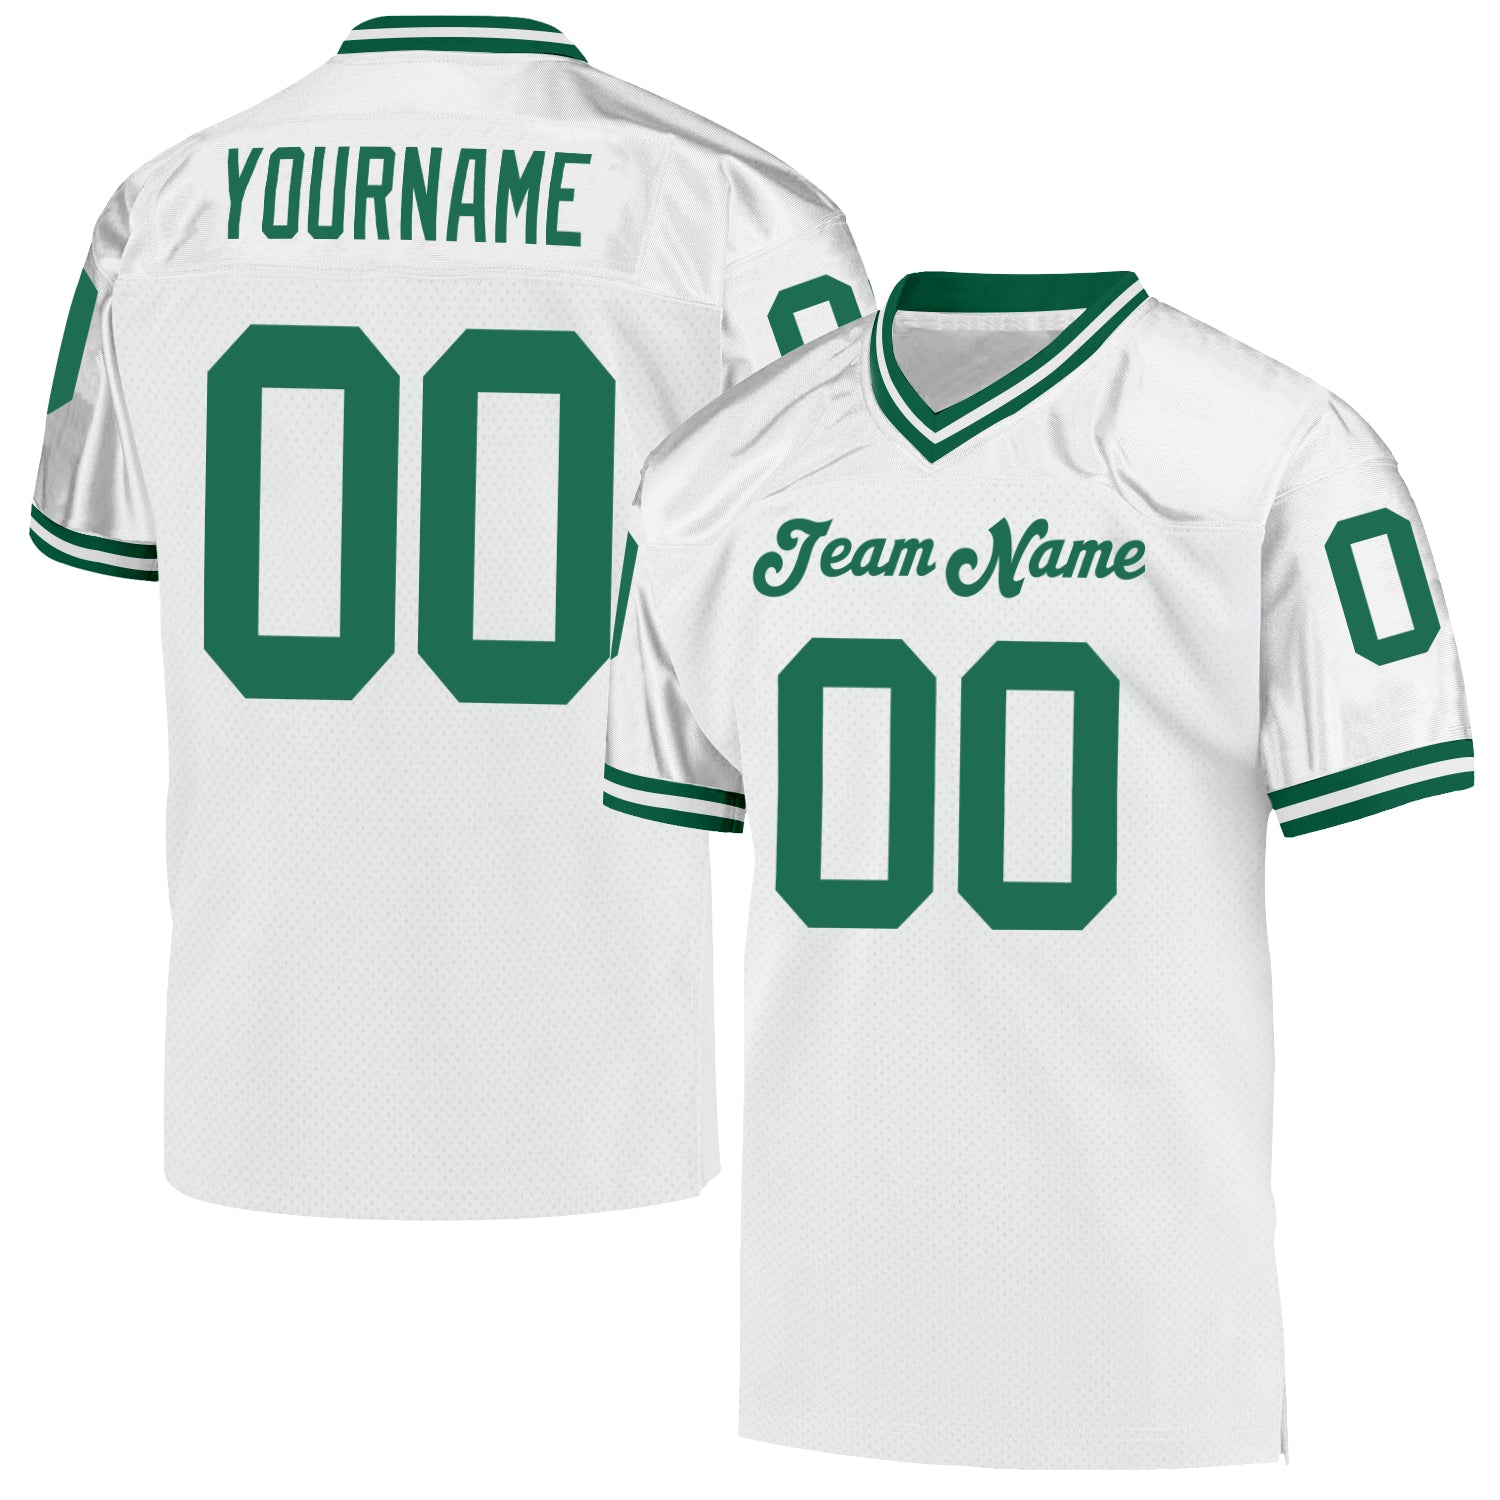 White Kelly Green Mesh Authentic Throwback Football Jersey Free Shipping – CustomJerseysPro